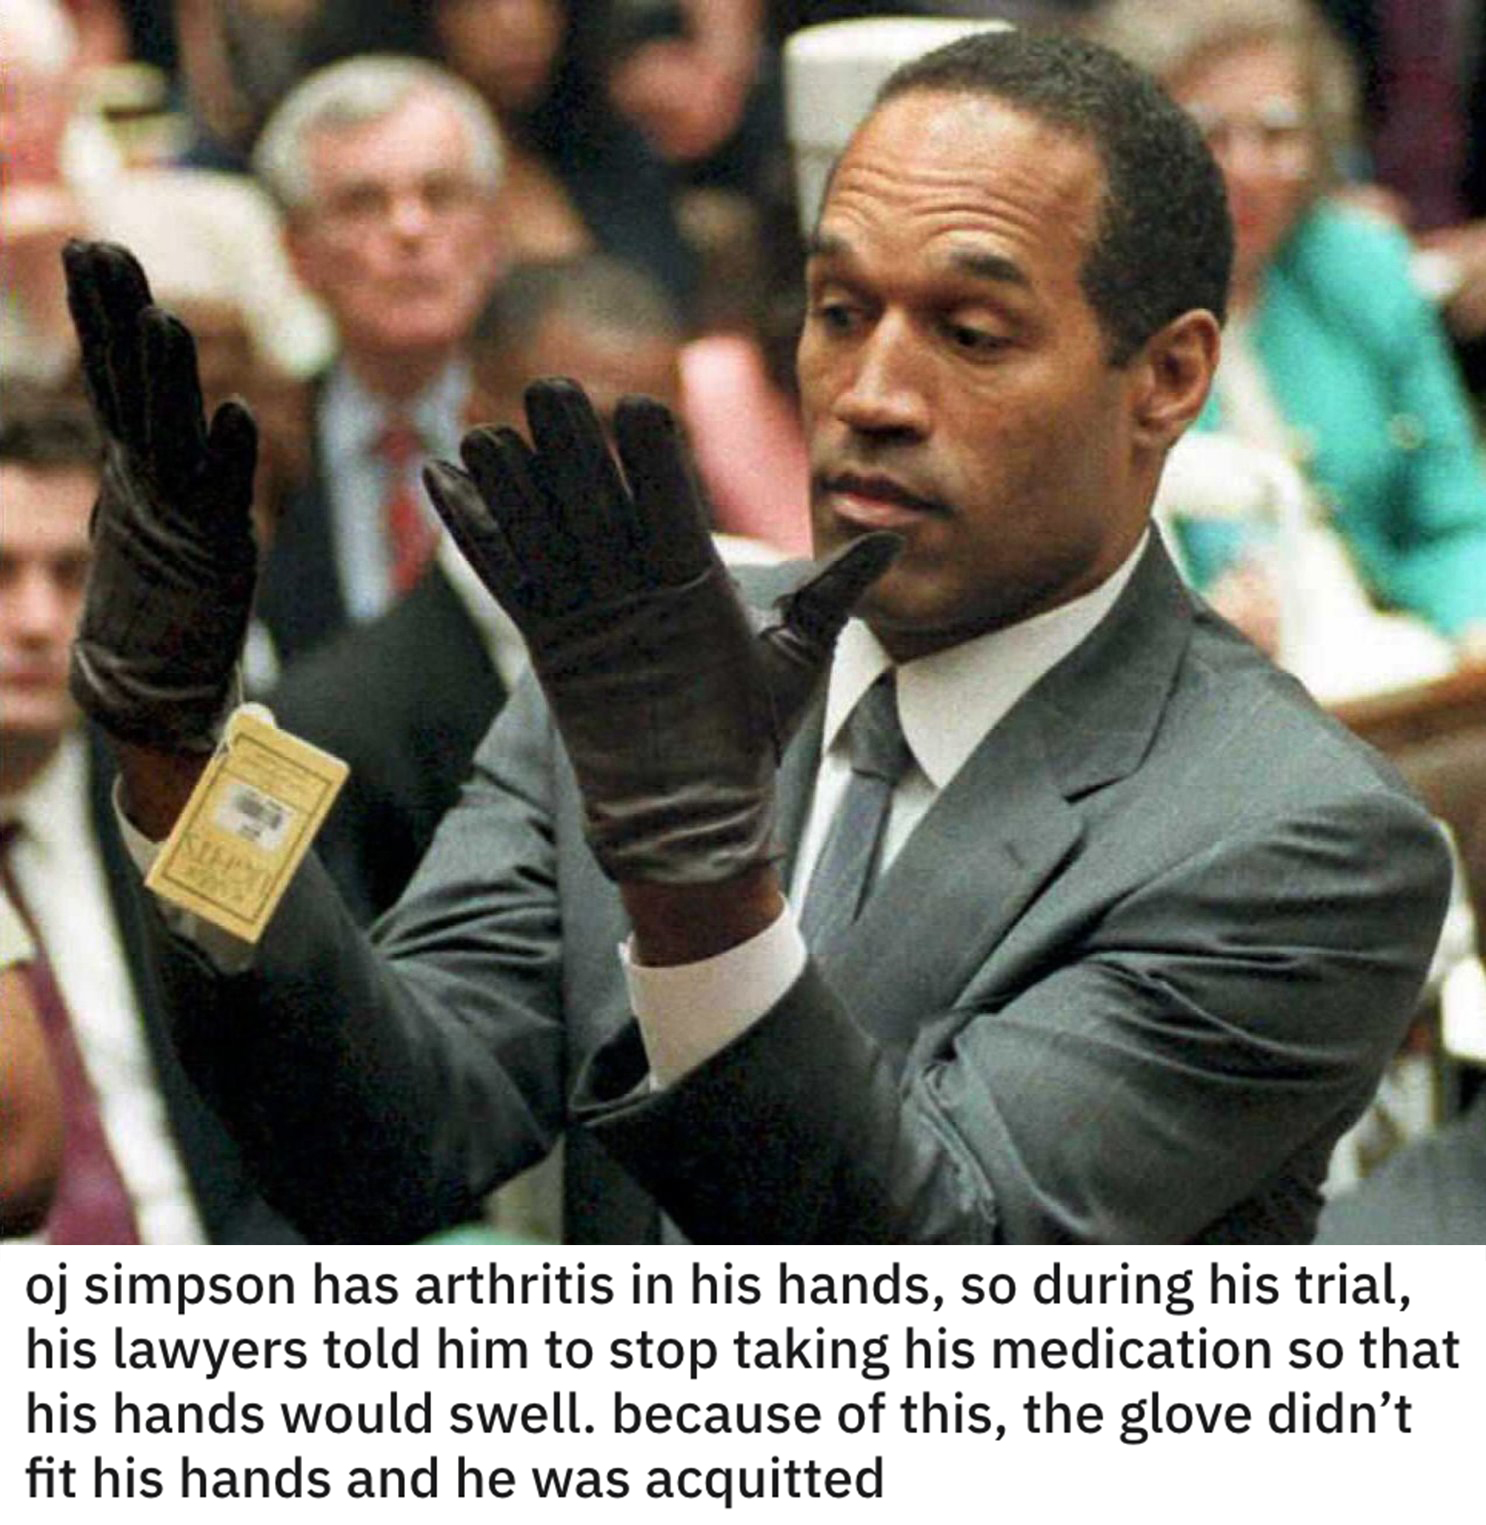 funny loopholes - oj simpson has arthritis in his hands, so during his trial, his lawyers told him to stop taking his medication so that his hands would swell, because of this, the glove didn't fit his hands and he was acquitted